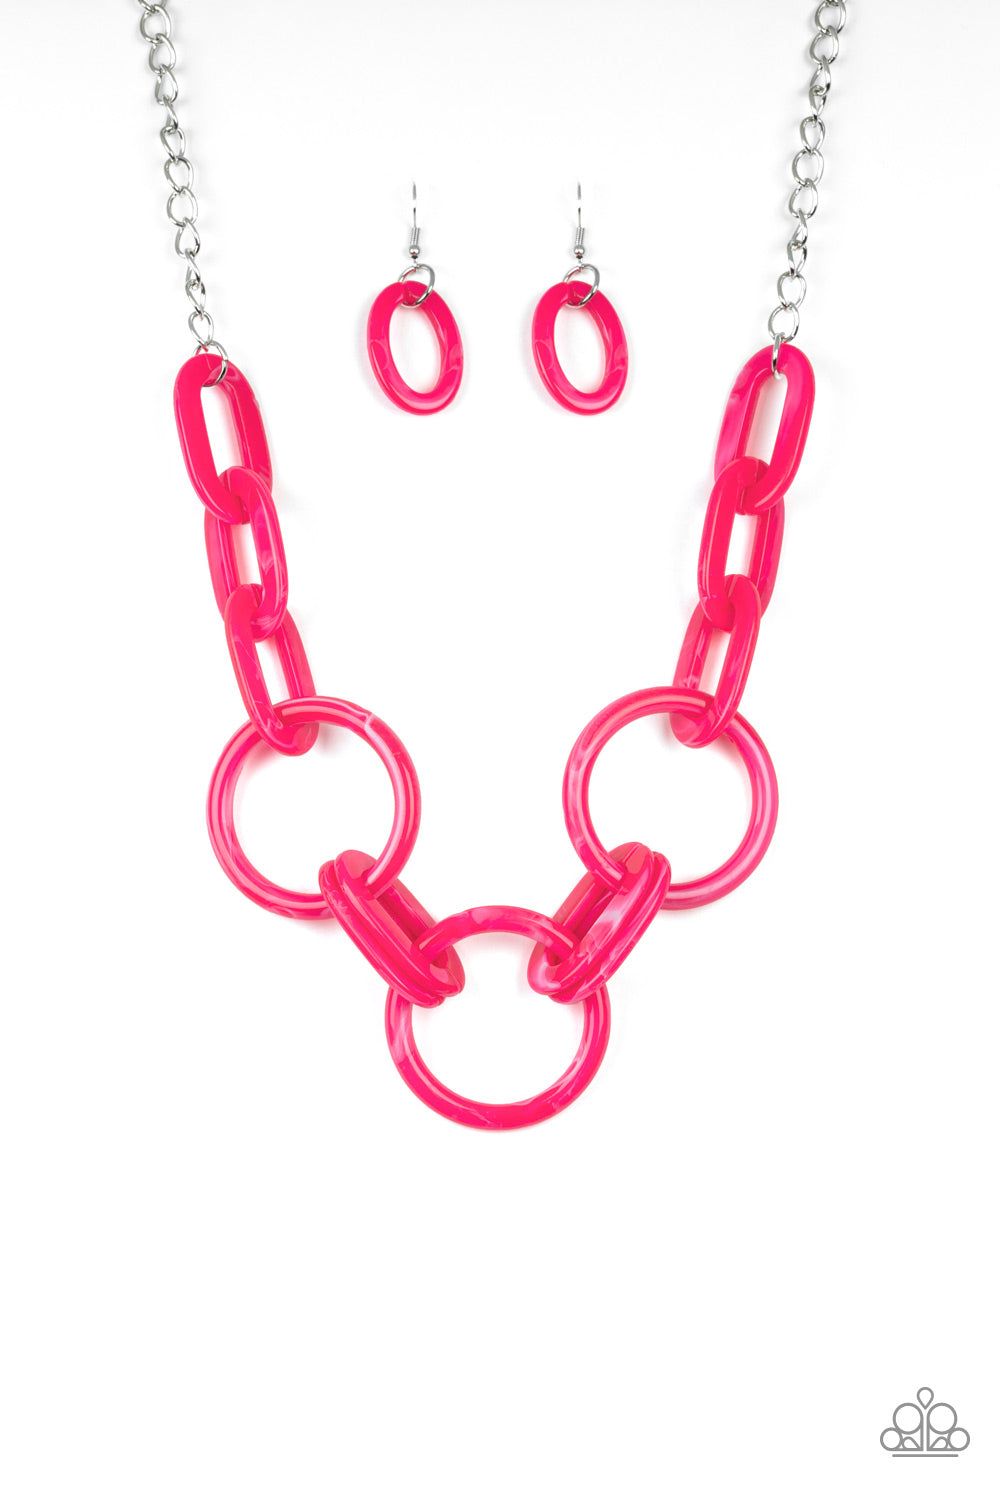 Turn Up The Heat Pink Paparazzi Necklace Cashmere Pink Jewels - Cashmere Pink Jewels & Accessories, Cashmere Pink Jewels & Accessories - Paparazzi